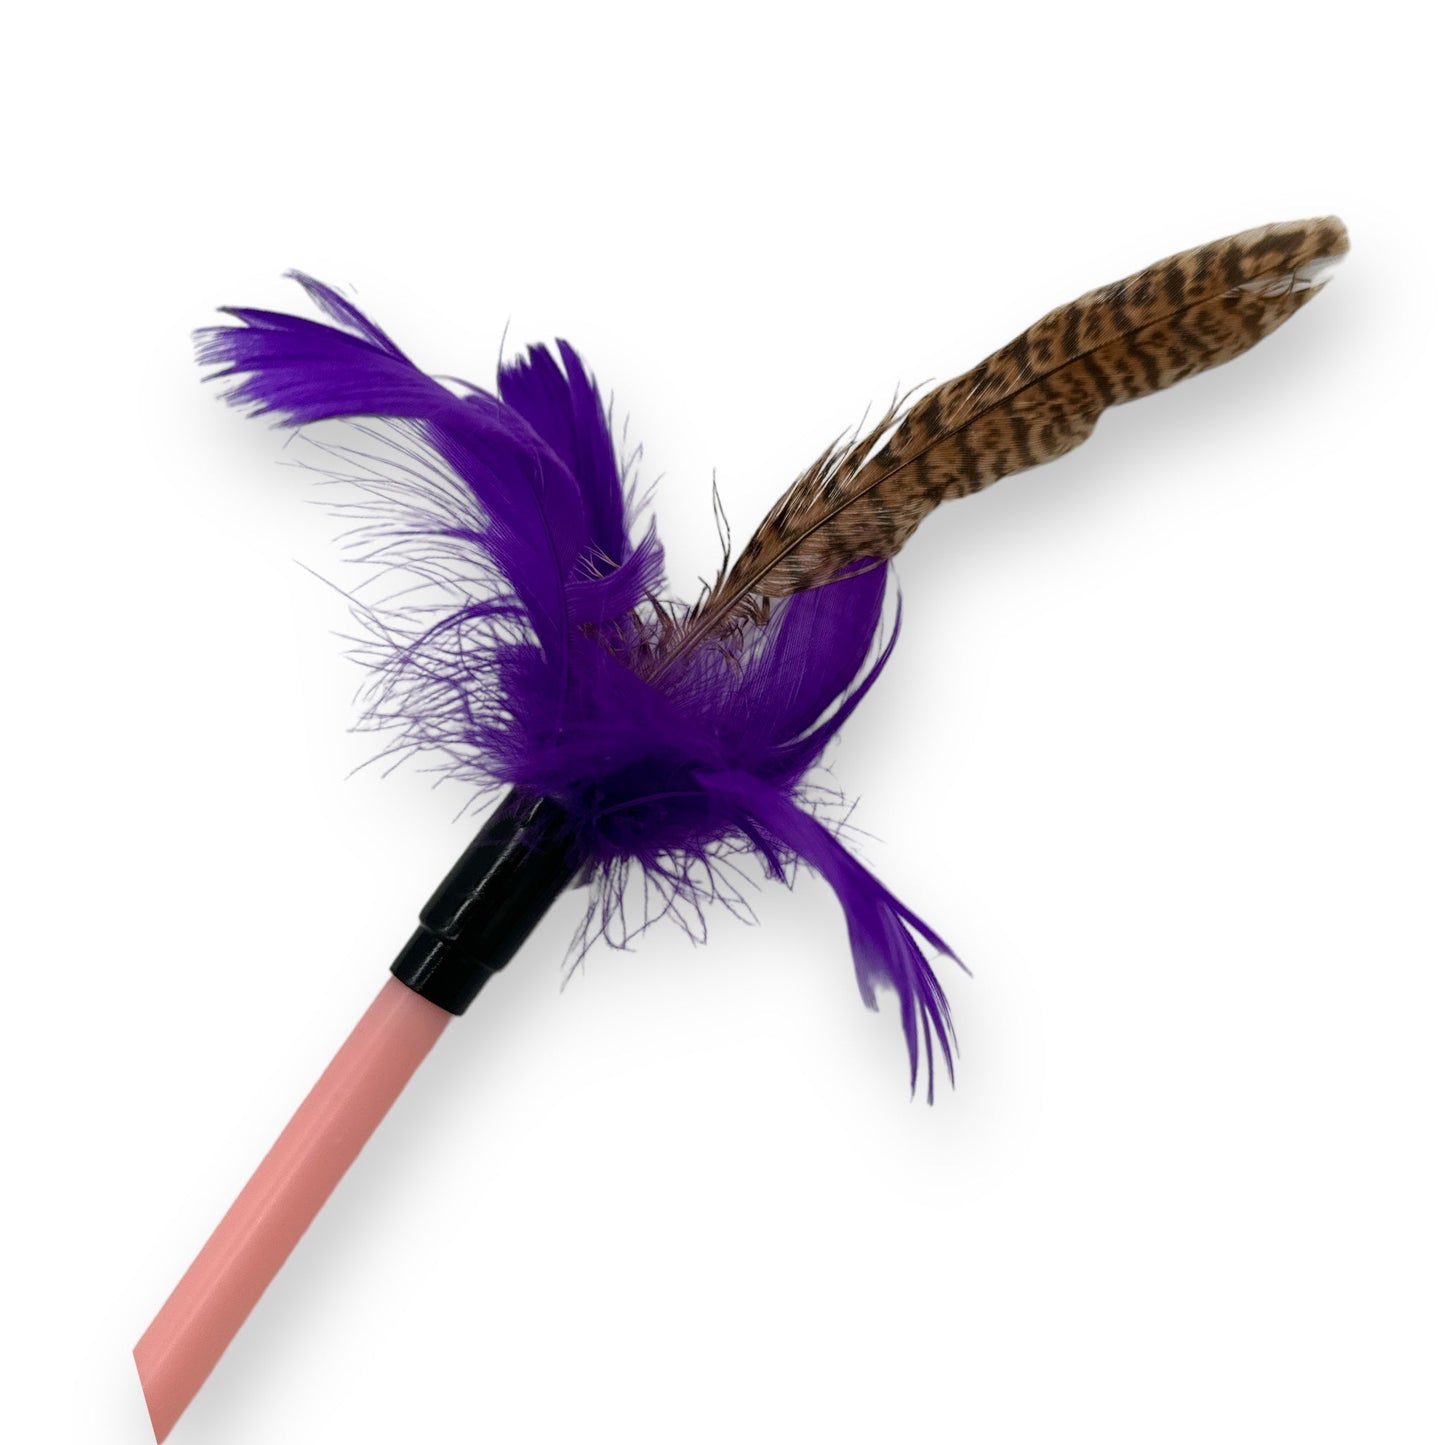 Cat Toy with Feathers - 42 cm